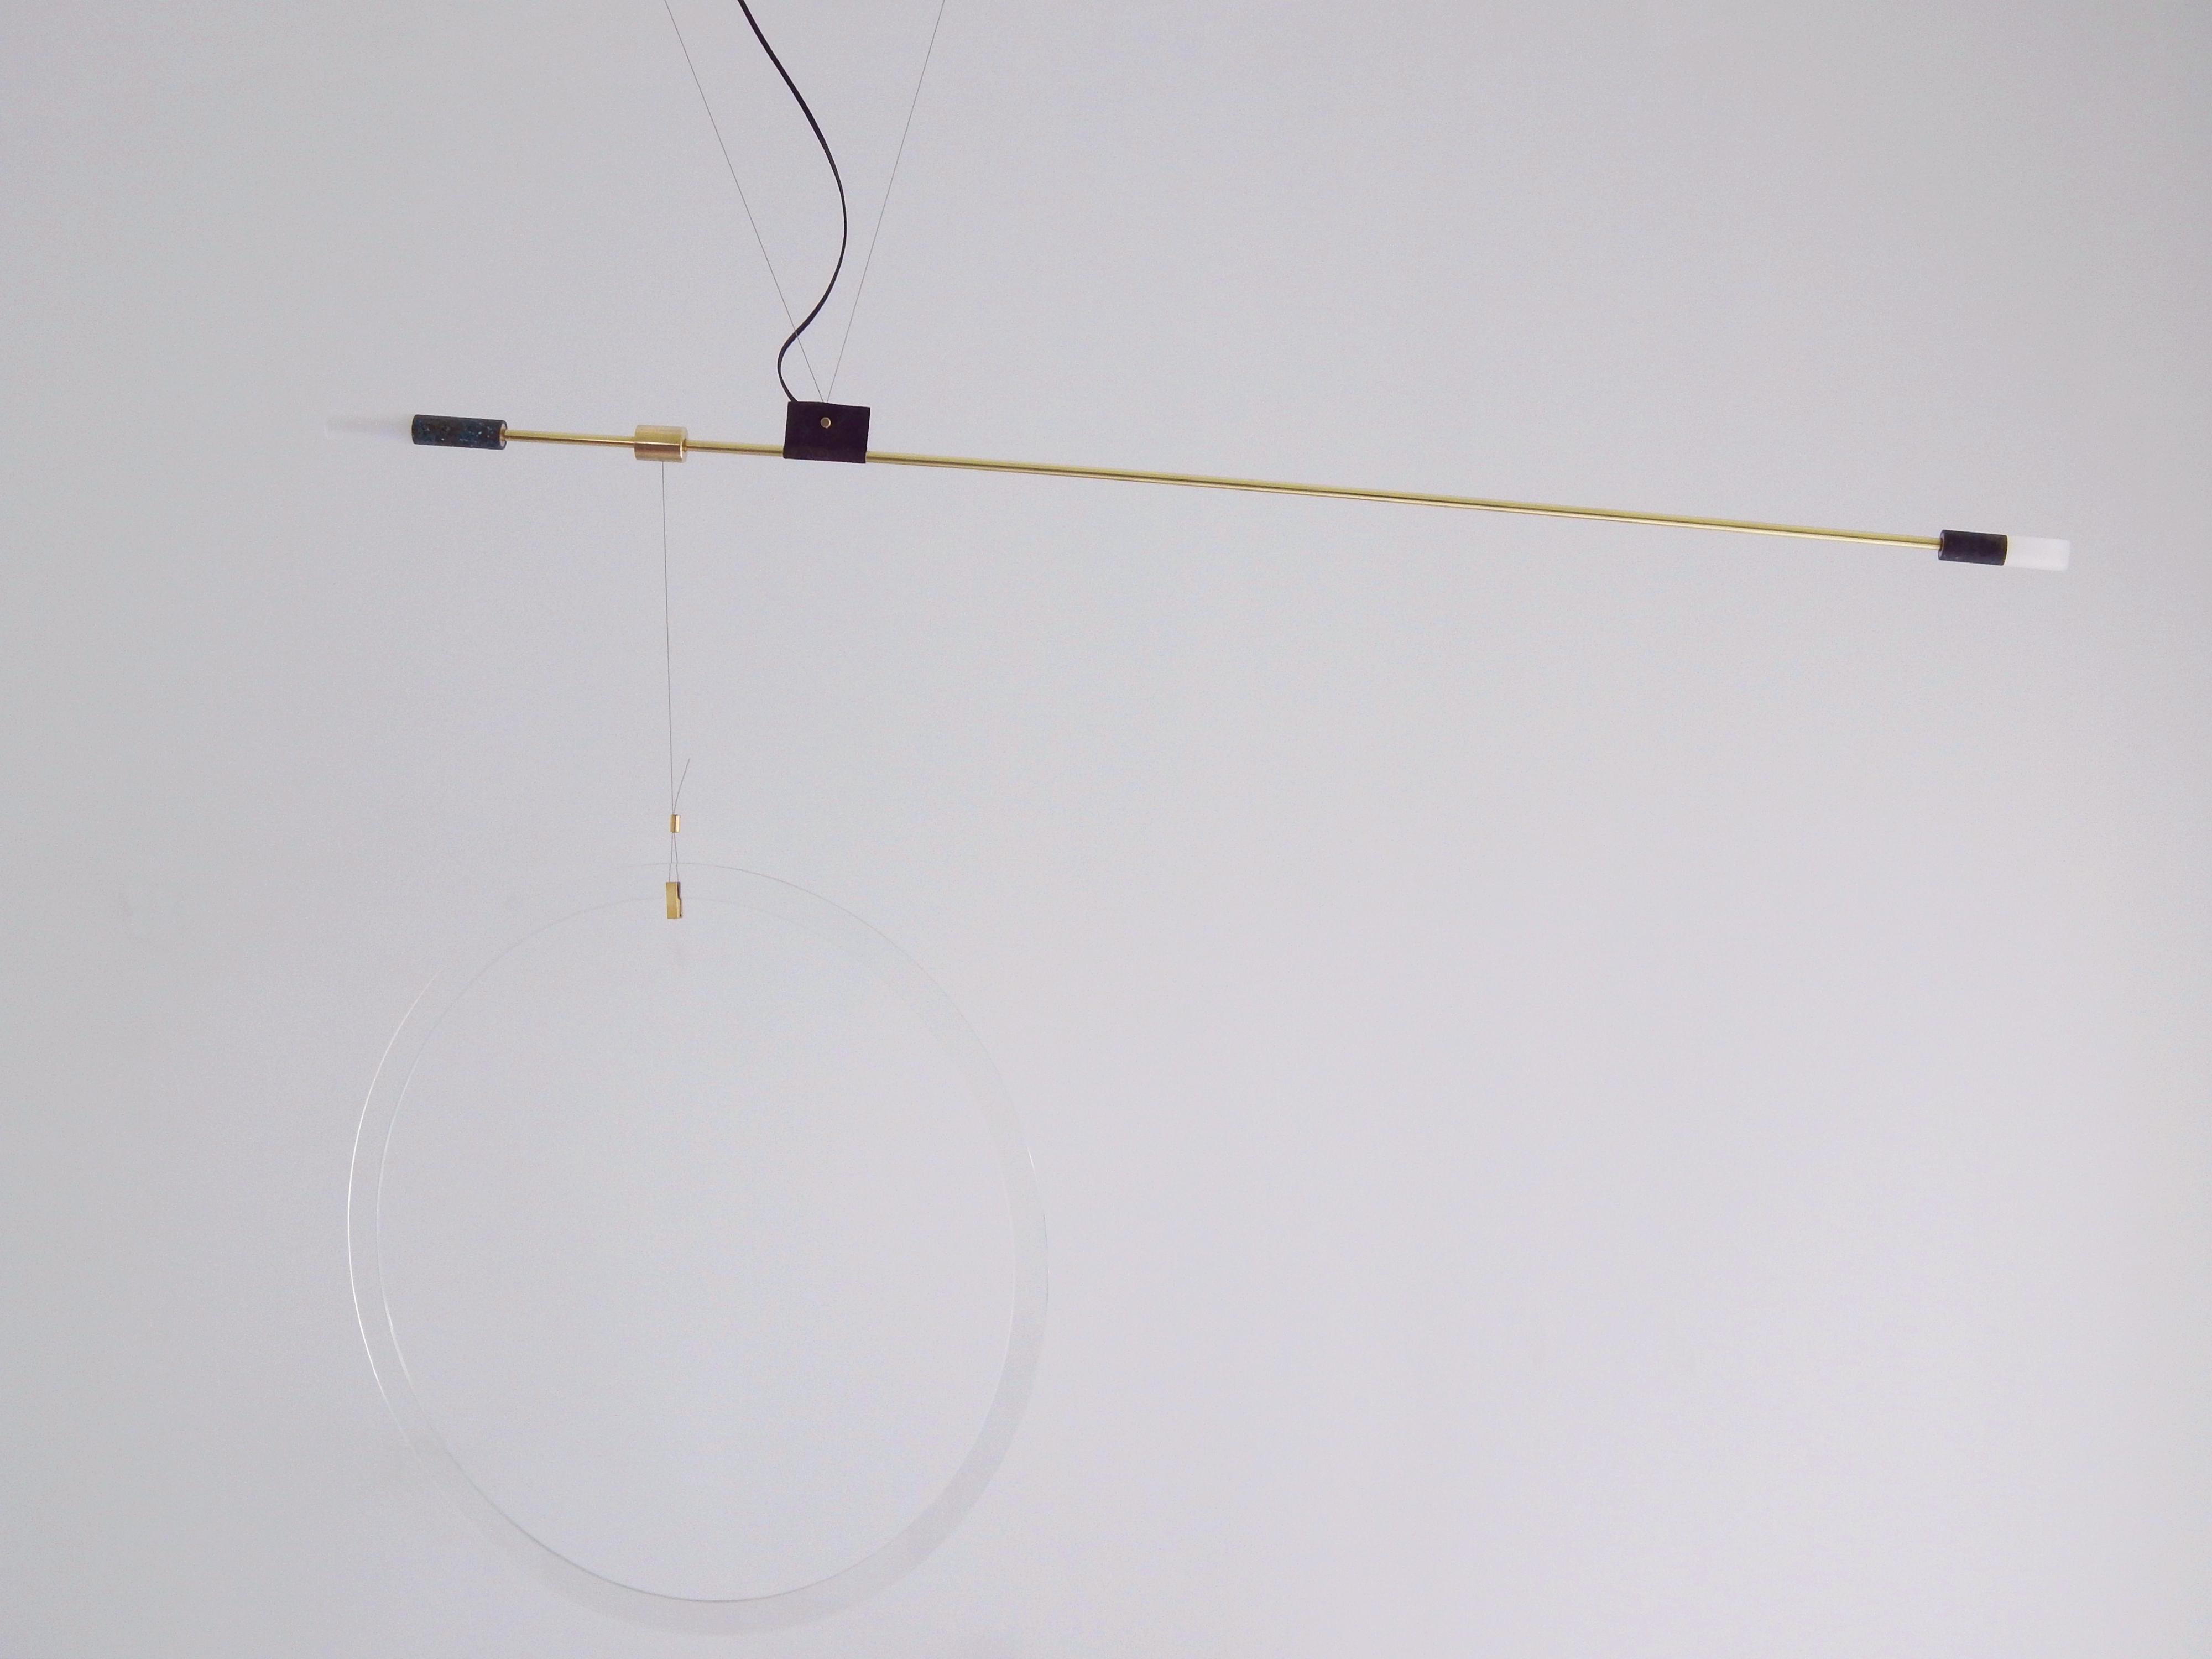 Opus III pendant lamp by Periclis Frementitis
Materials: polished brass, oxidized brass, acrylic tube parts, G4 LED bulb.
Dimensions: W 130 x H 80 x D 3 cm.

Due to the handmade nature of this product dimensions may vary up to 10% for balancing